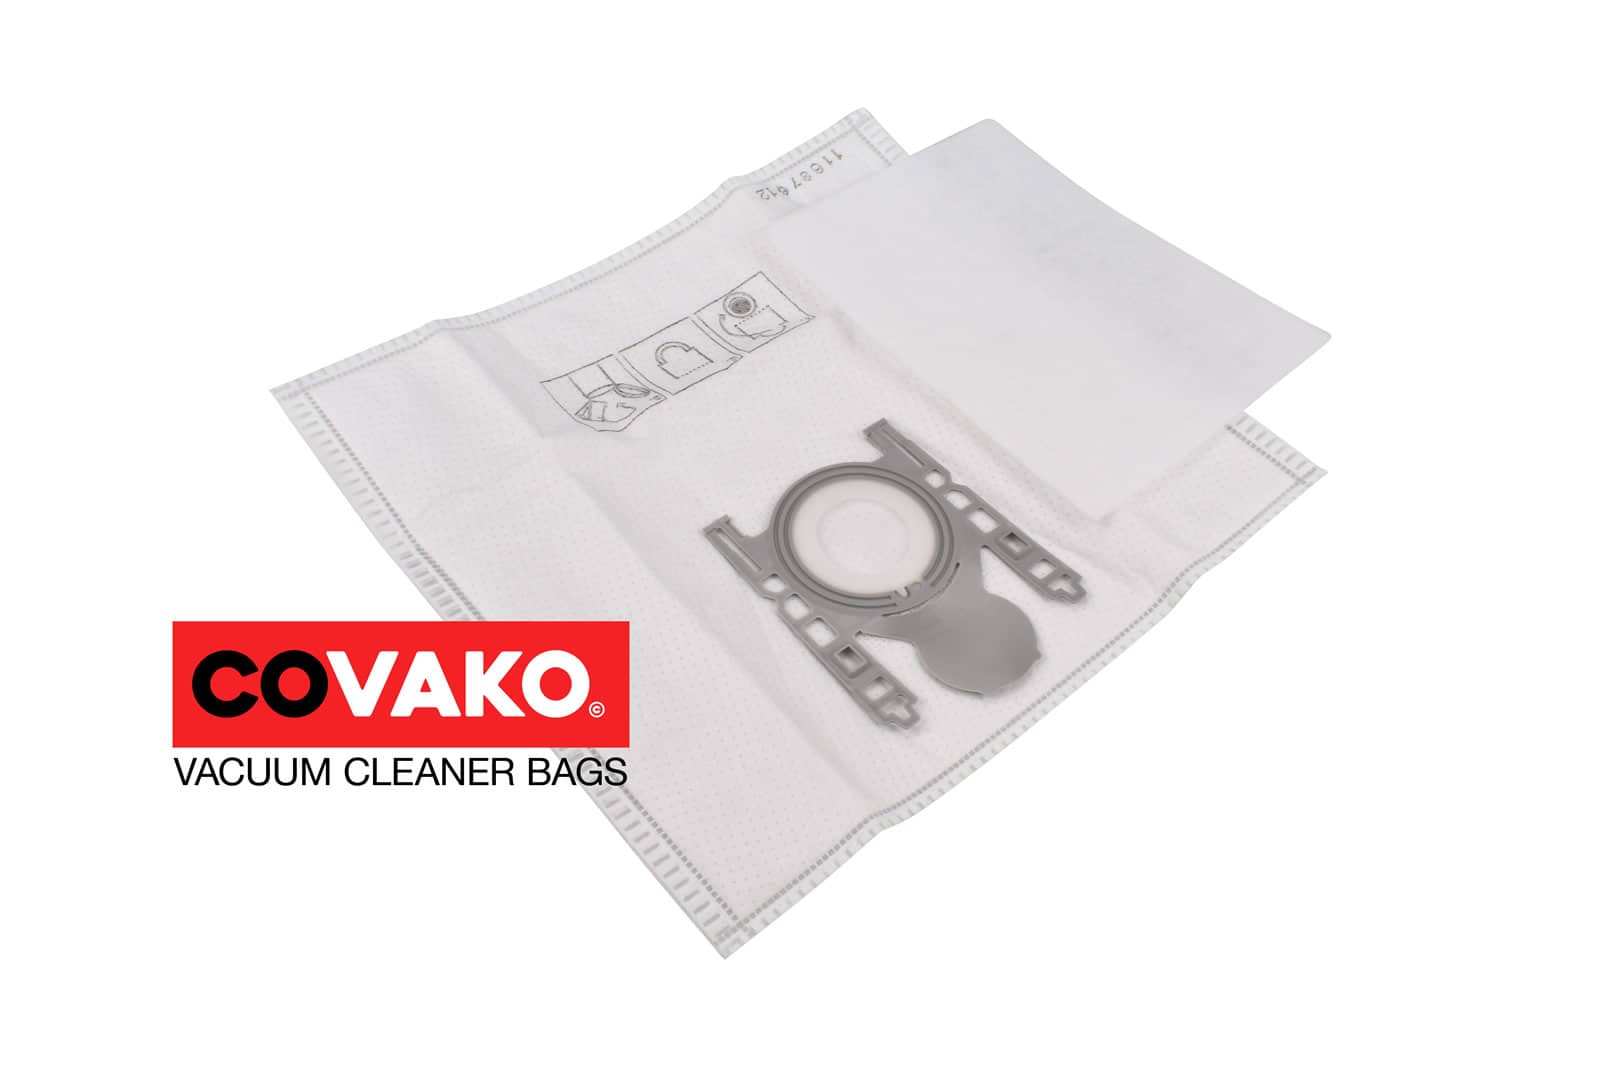 Bosch BSGL 5310 / Synthesis - Bosch vacuum cleaner bags